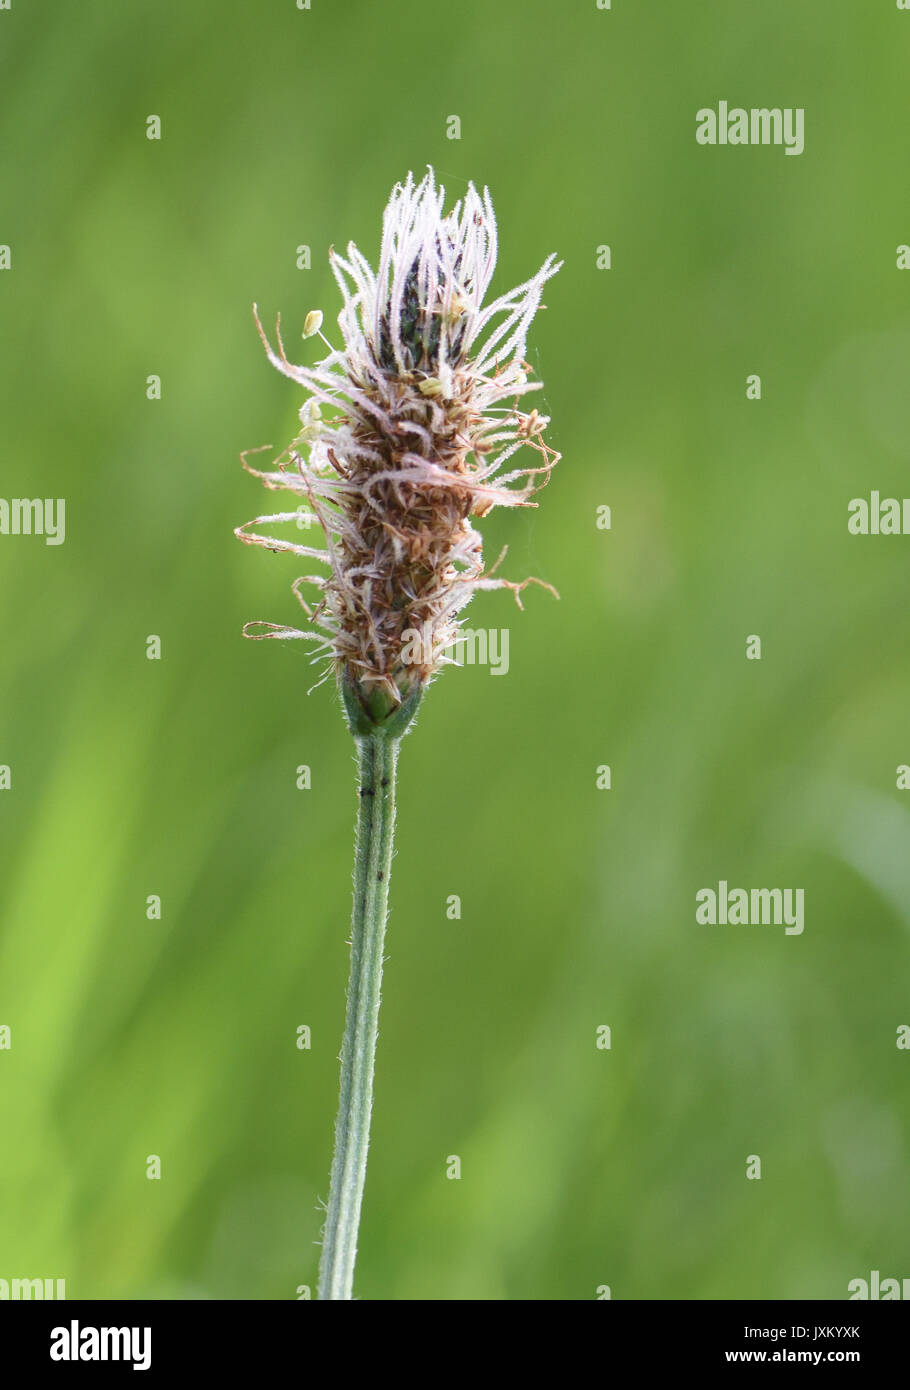 Flower heard of ribwort plantain (Plantago lanceolata) where most of the male parts, anther and filament, are finished and the female stigma and style Stock Photo